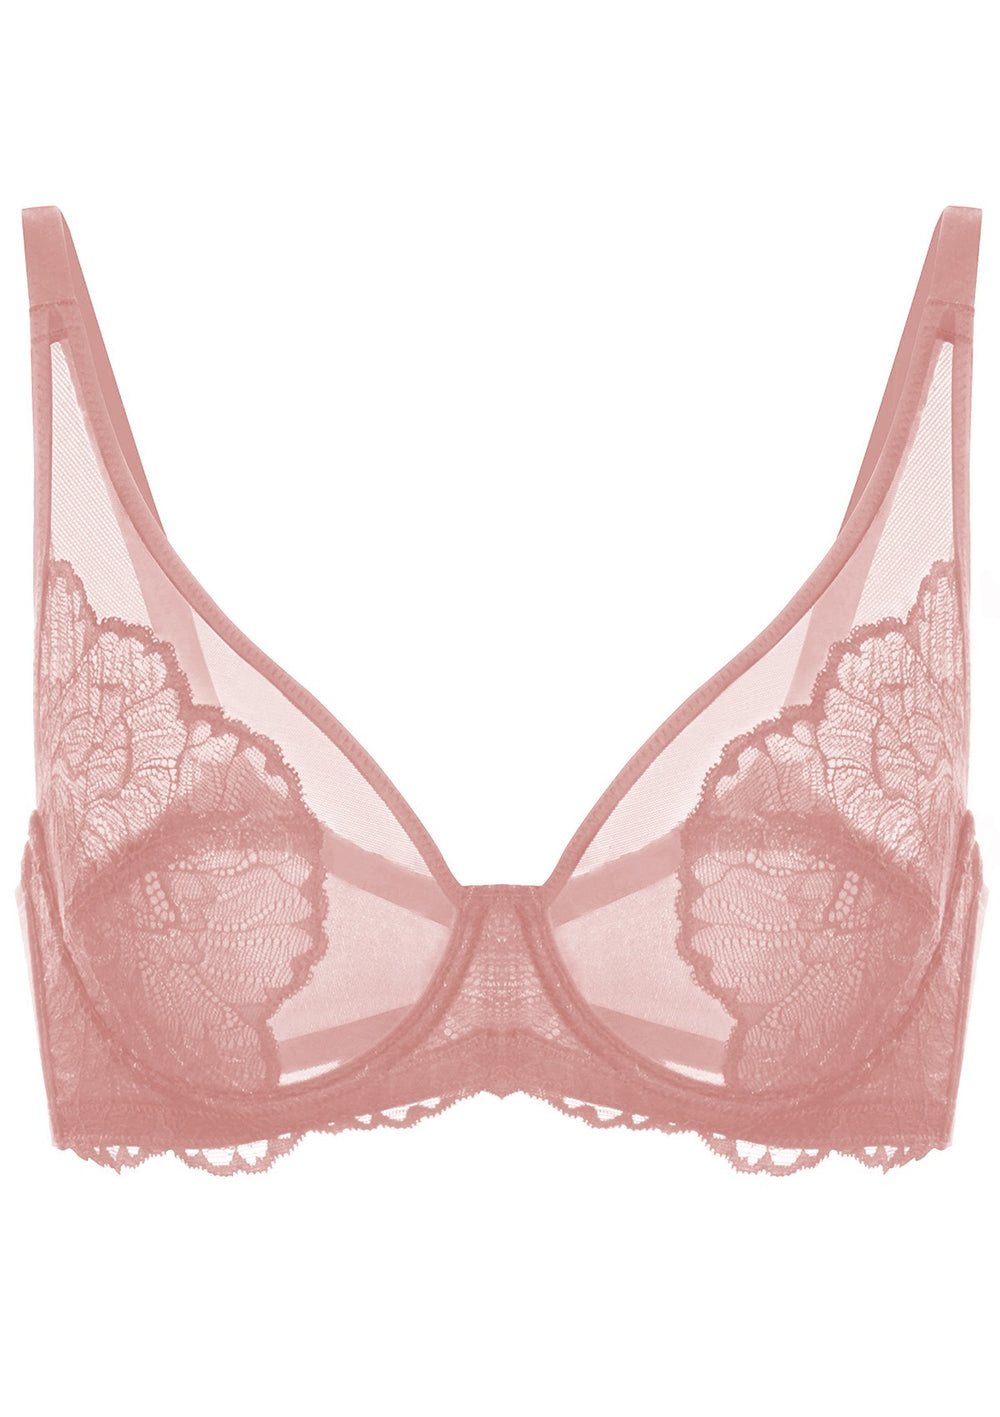 Beautiful Lace Lingerie on a White Isolated Background. Burgundy